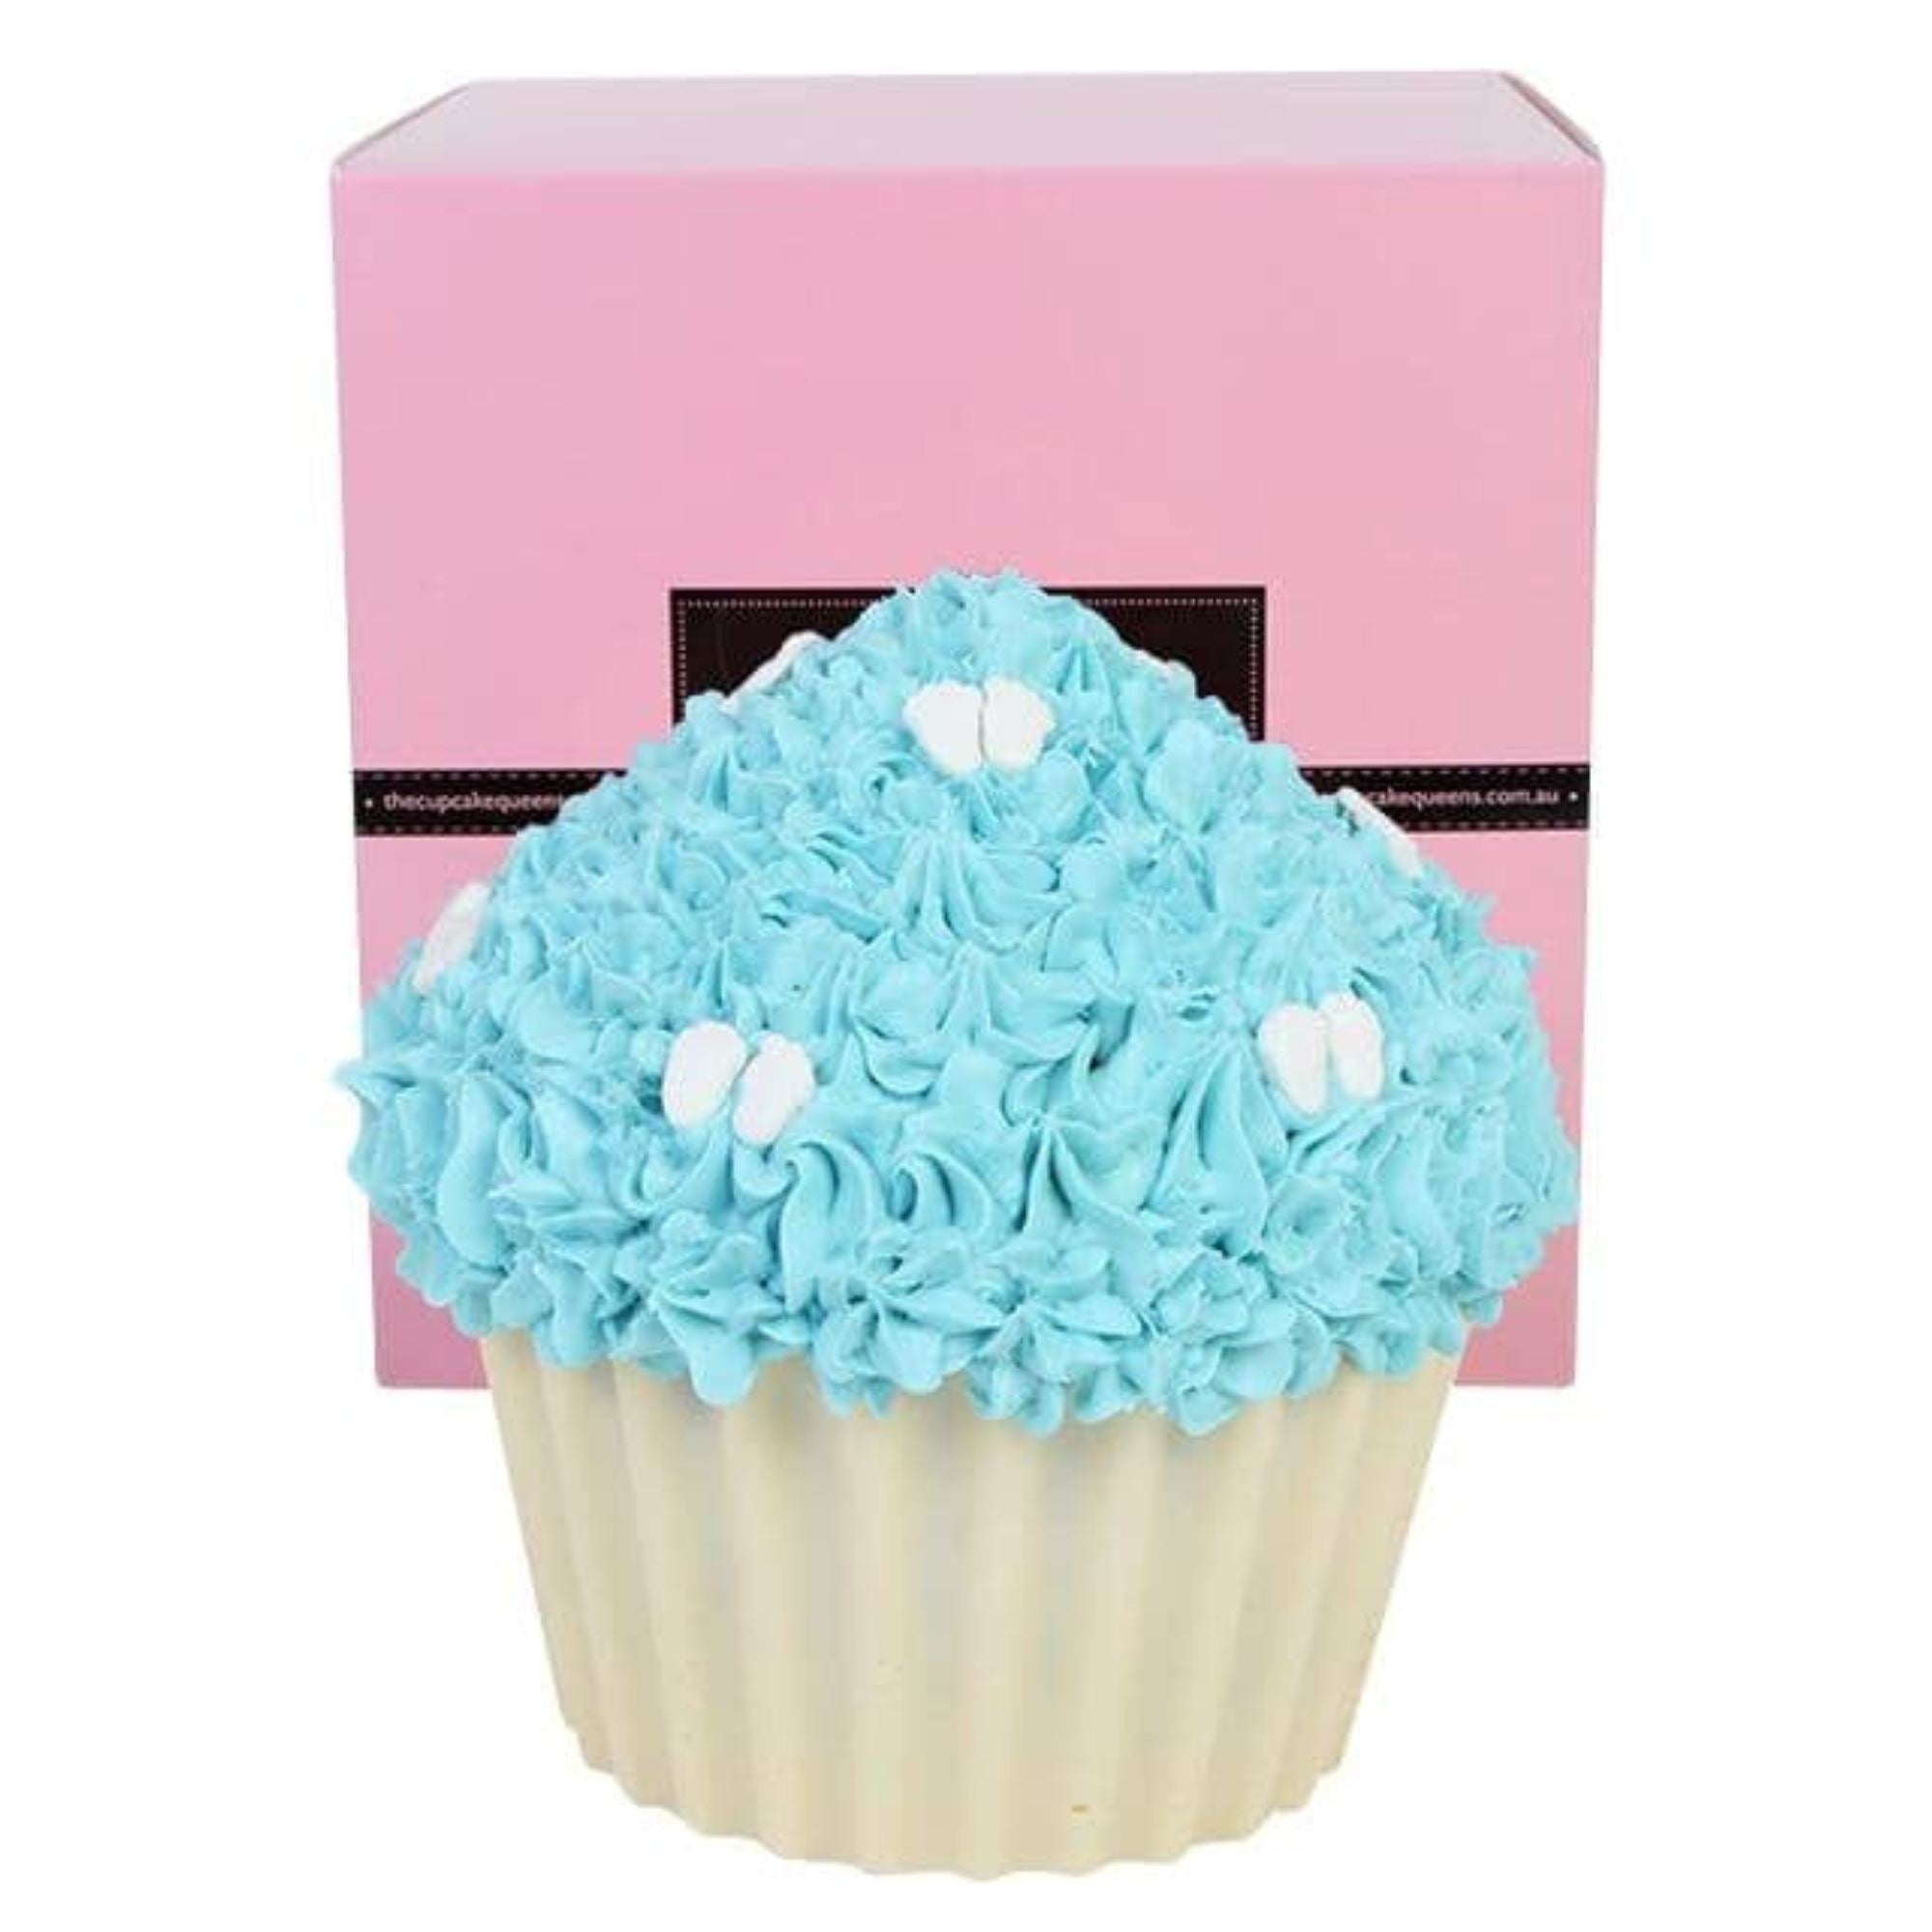 Blue Vanilla Giant Cupcake with Baby Feet Cakes The Cupcake Queens 